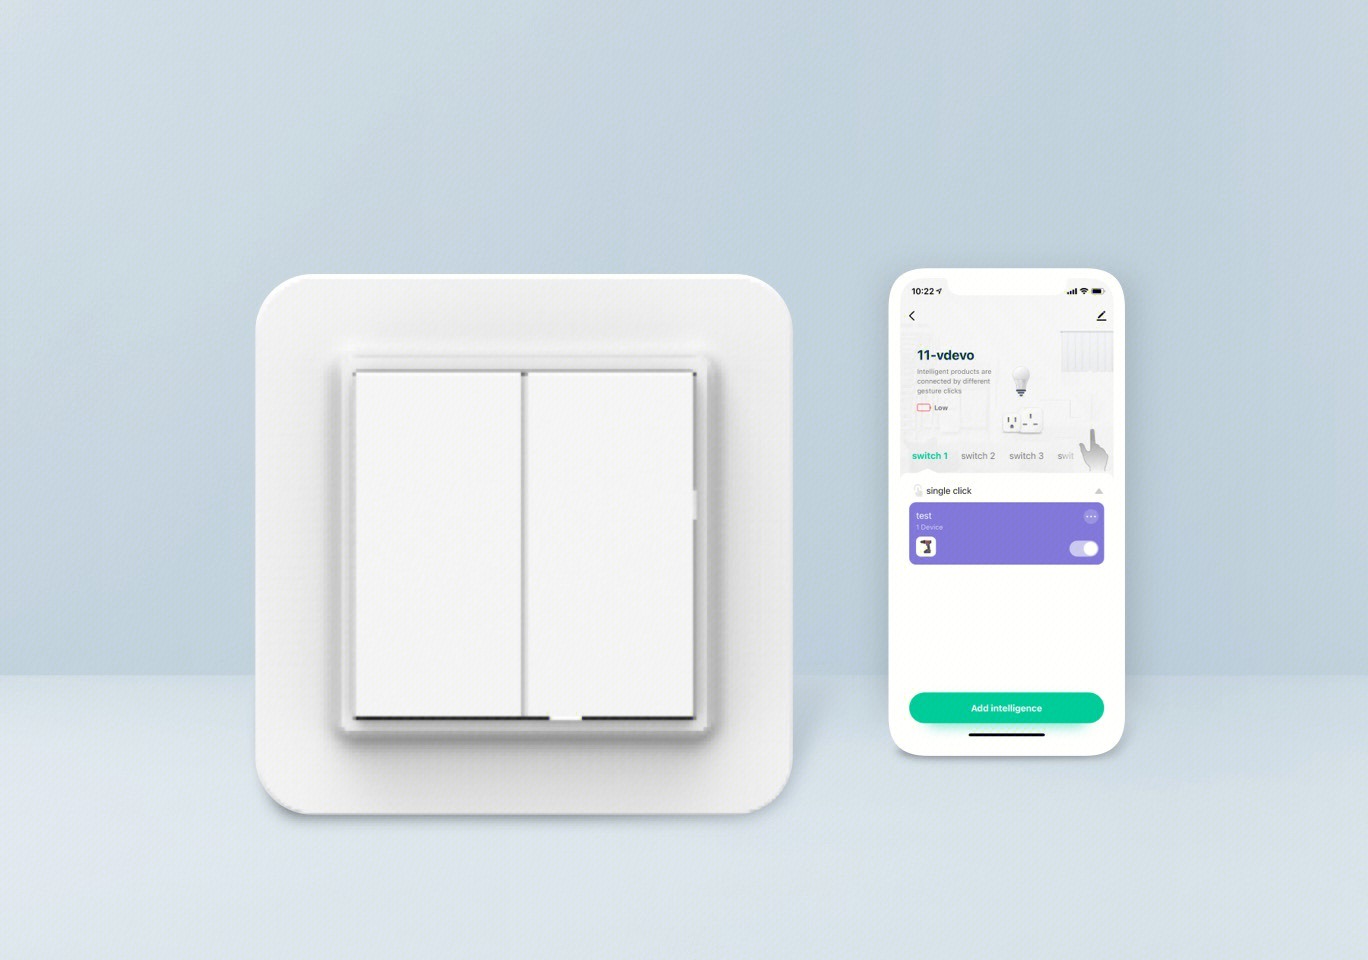 The batteryless wireless light switch makes life simple